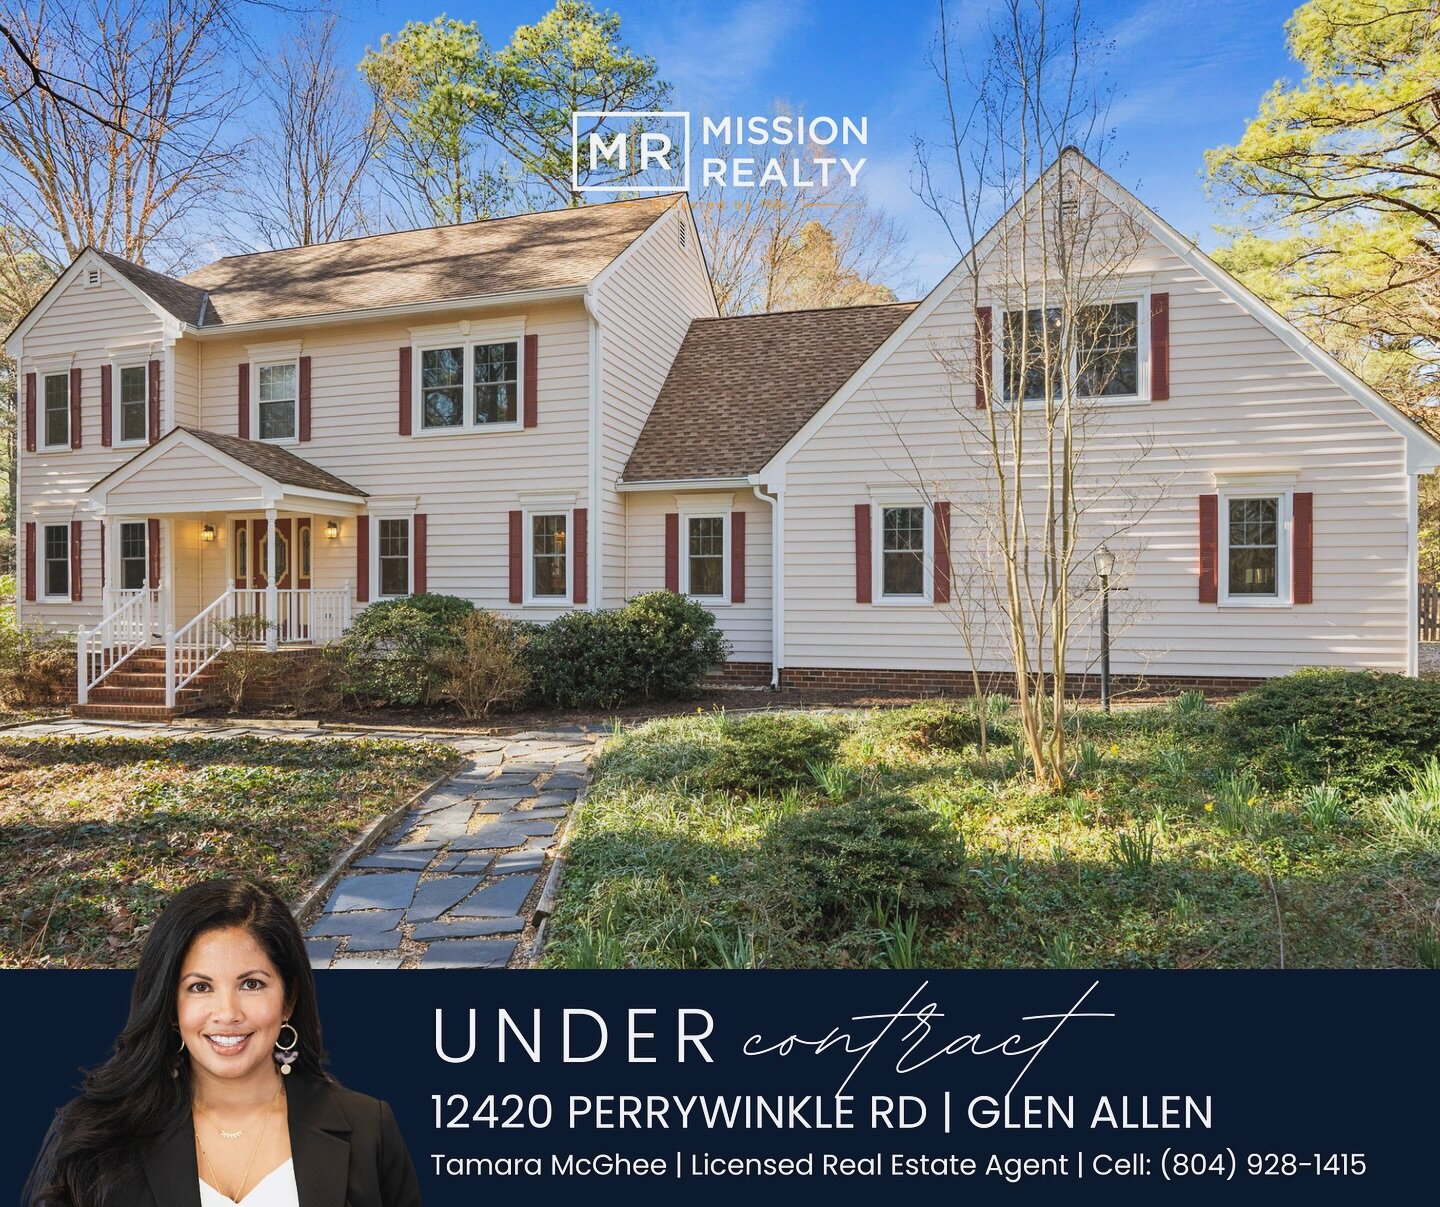 🏡 Under Contract! 12420 Perrywinkle Rd in Glen Allen is now off the market! This stunning colonial-style home in the sought-after Shady Grove Estates &amp; Westfield has found its new owner. Congratulations to Tamara McGhee for another successful li